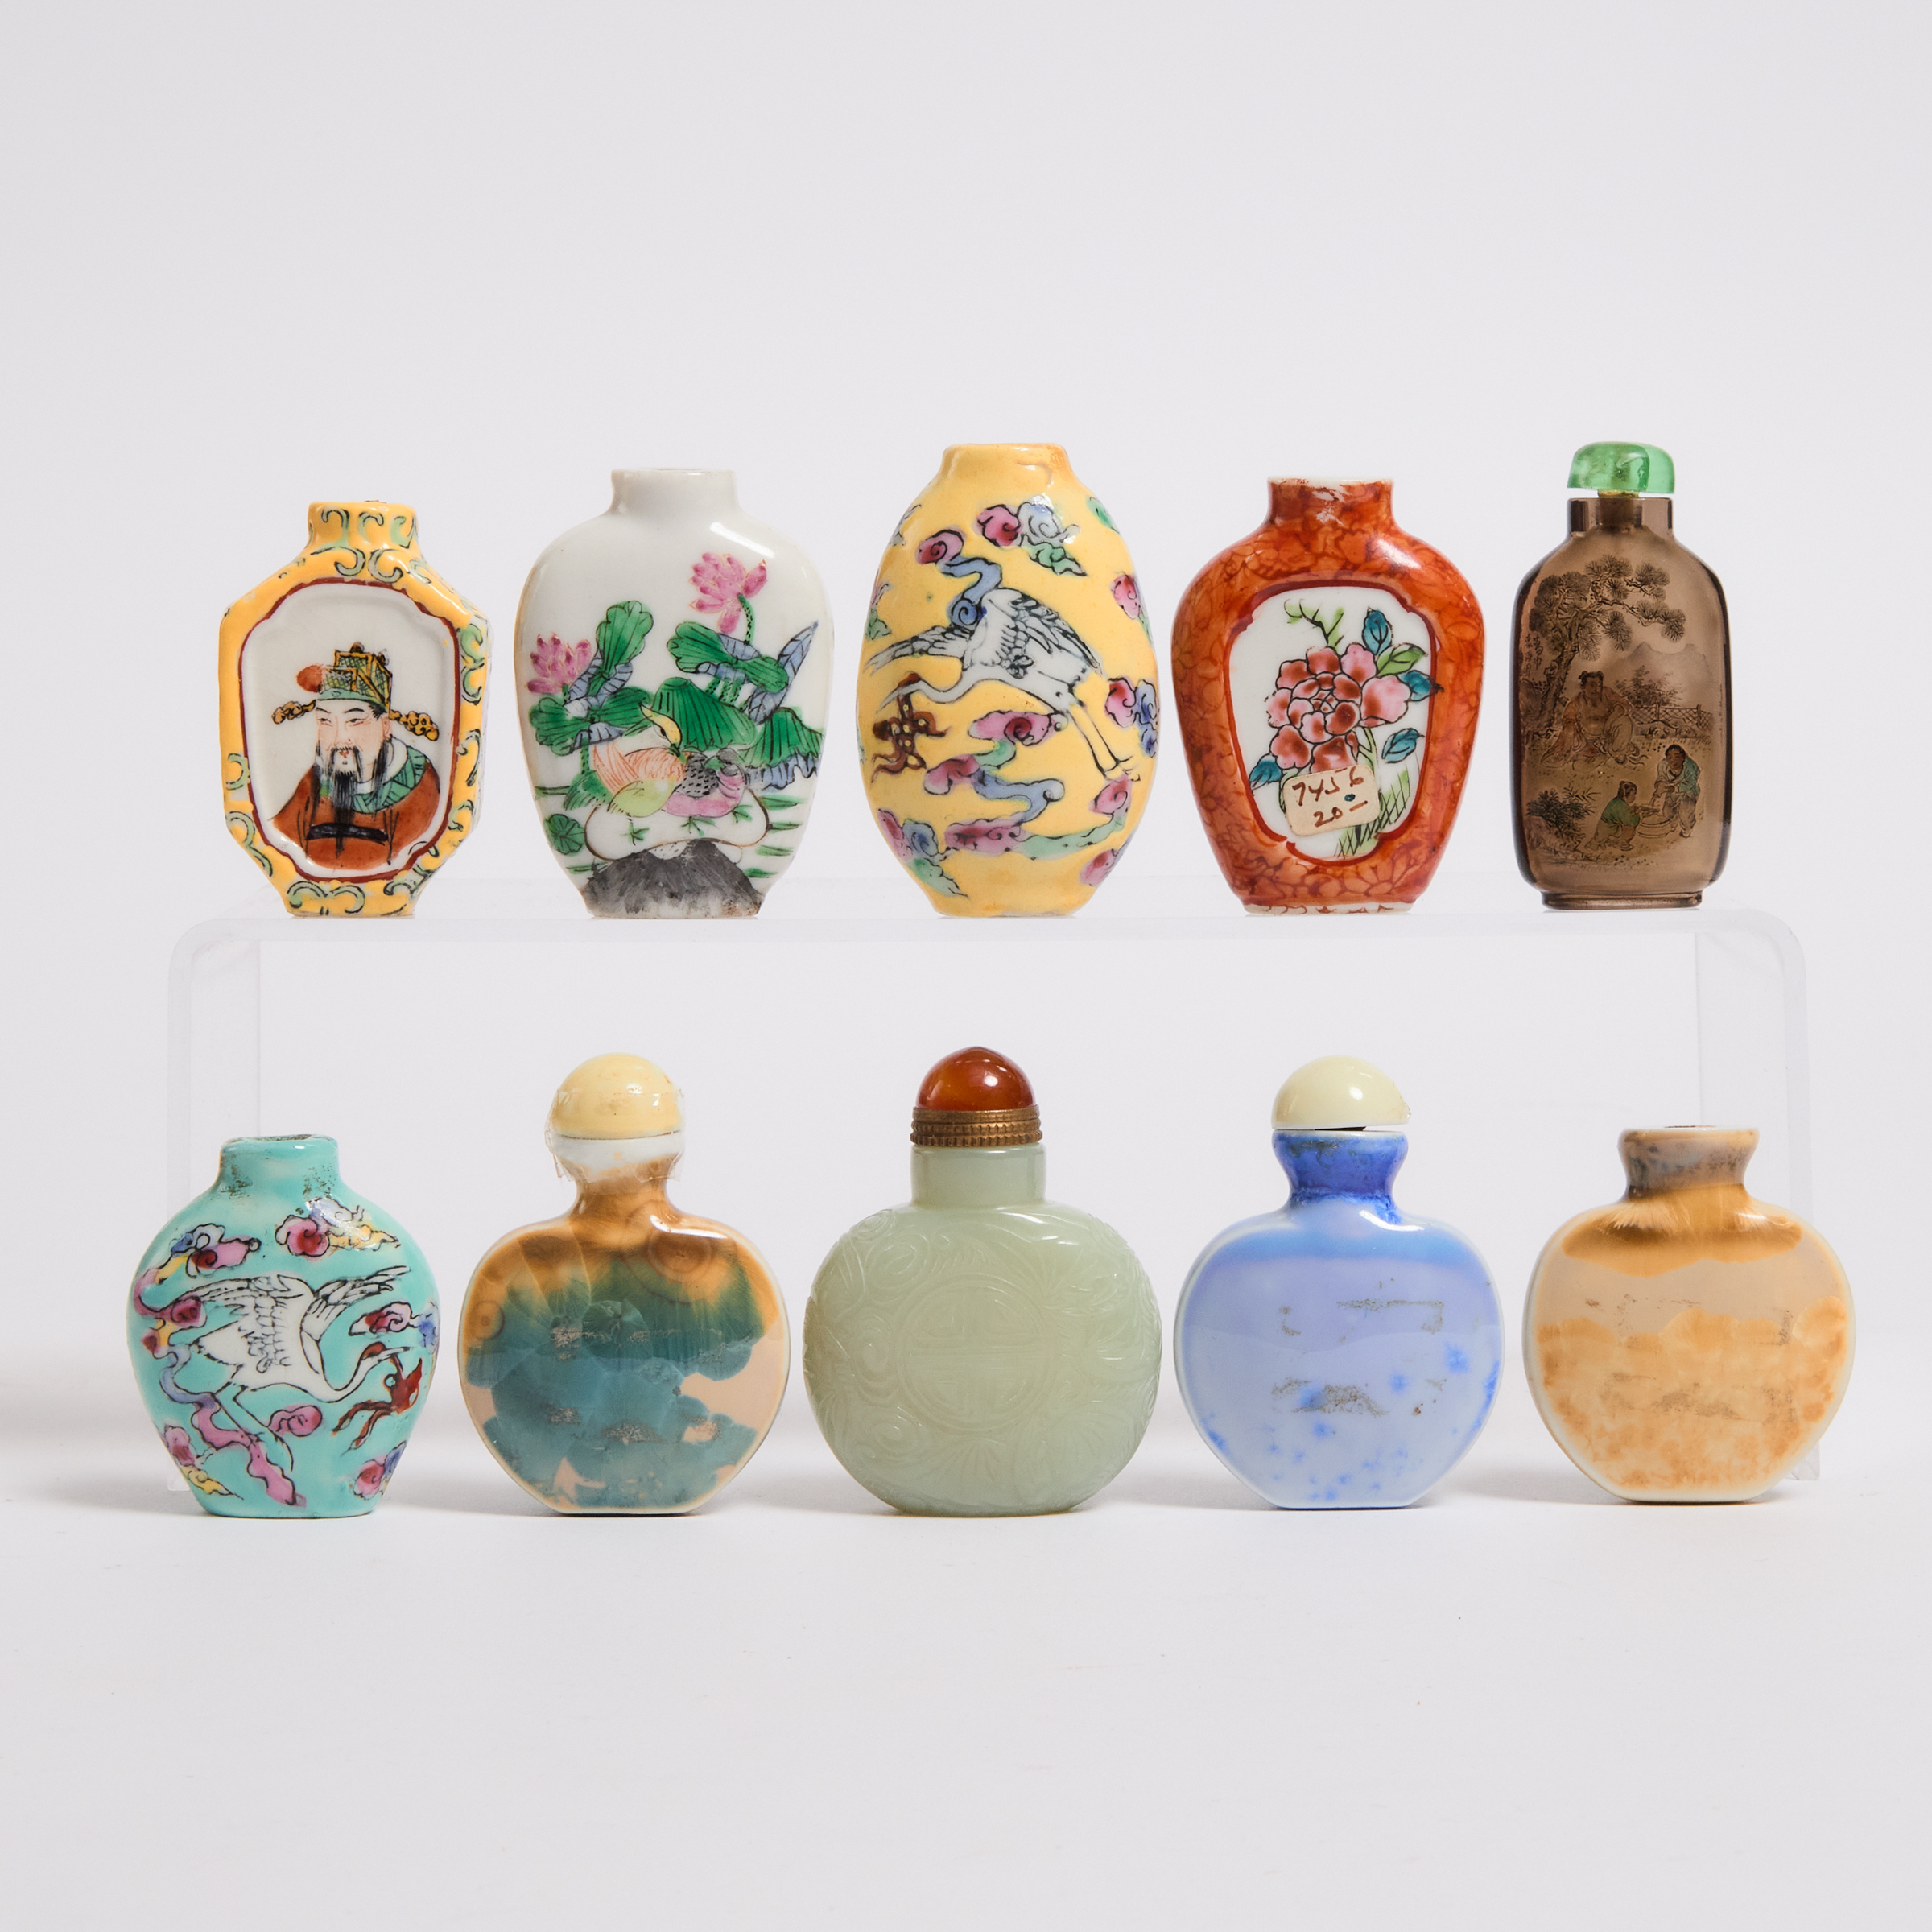 A Group of Ten Porcelain, Glass, and Hardstone Snuff Bottles, 19th-20th Century